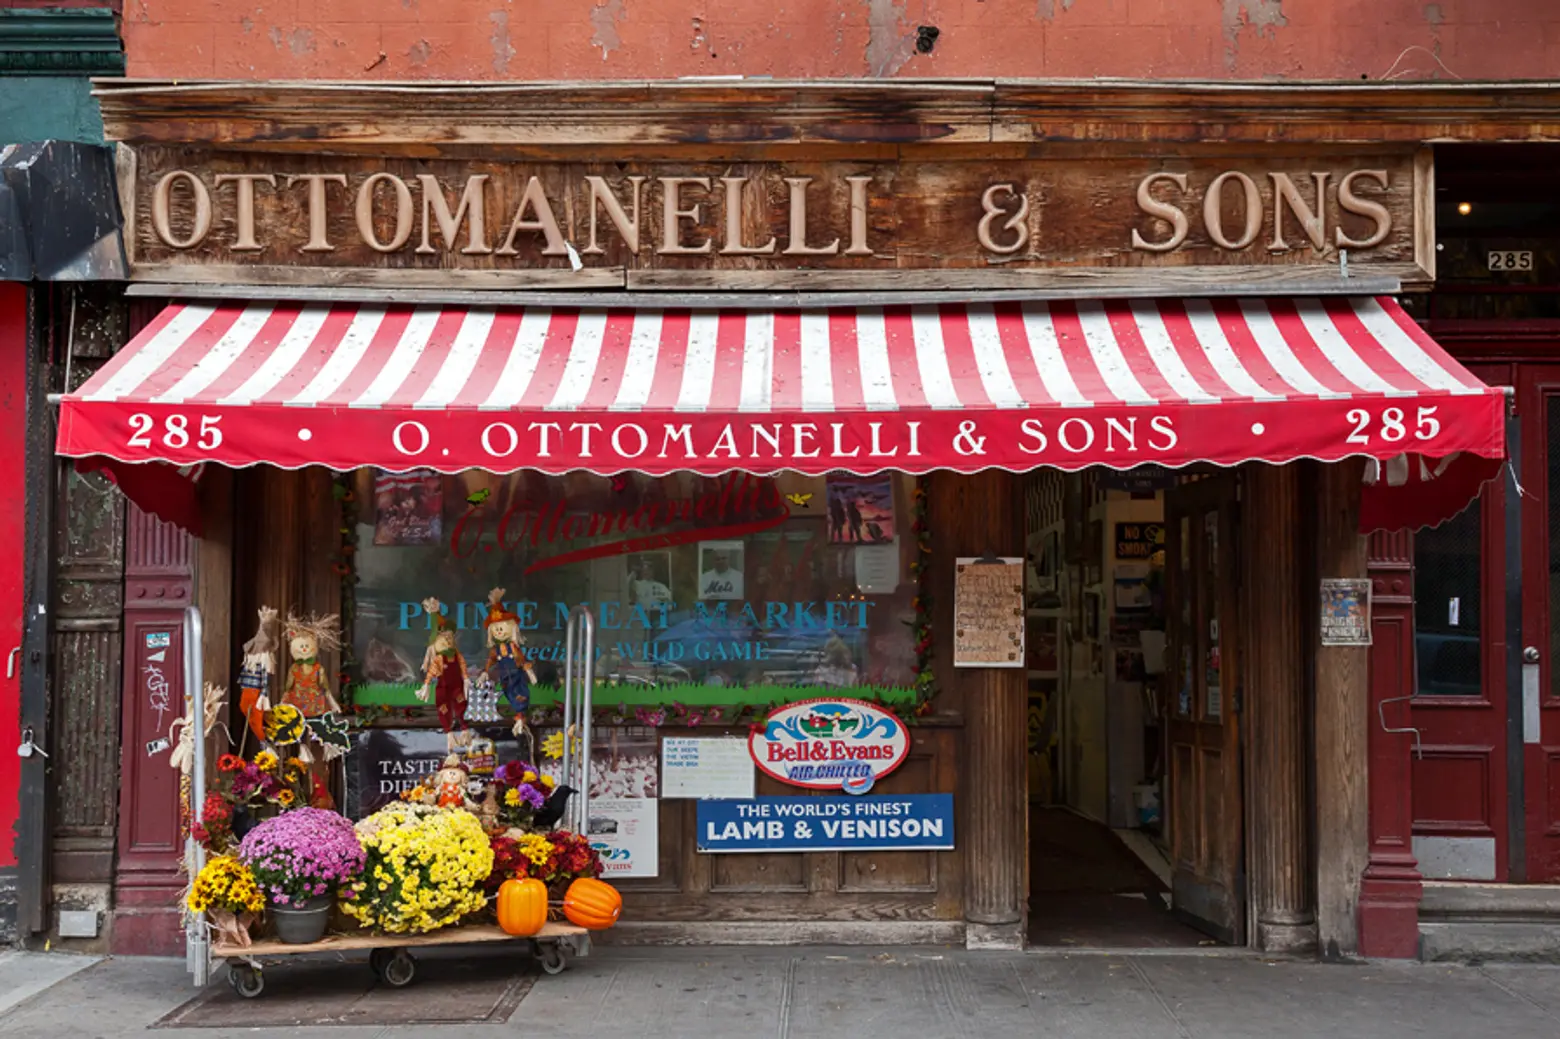 O. OTTOMANELLI & SONS PRIME MEAT MARKET, NYC signage